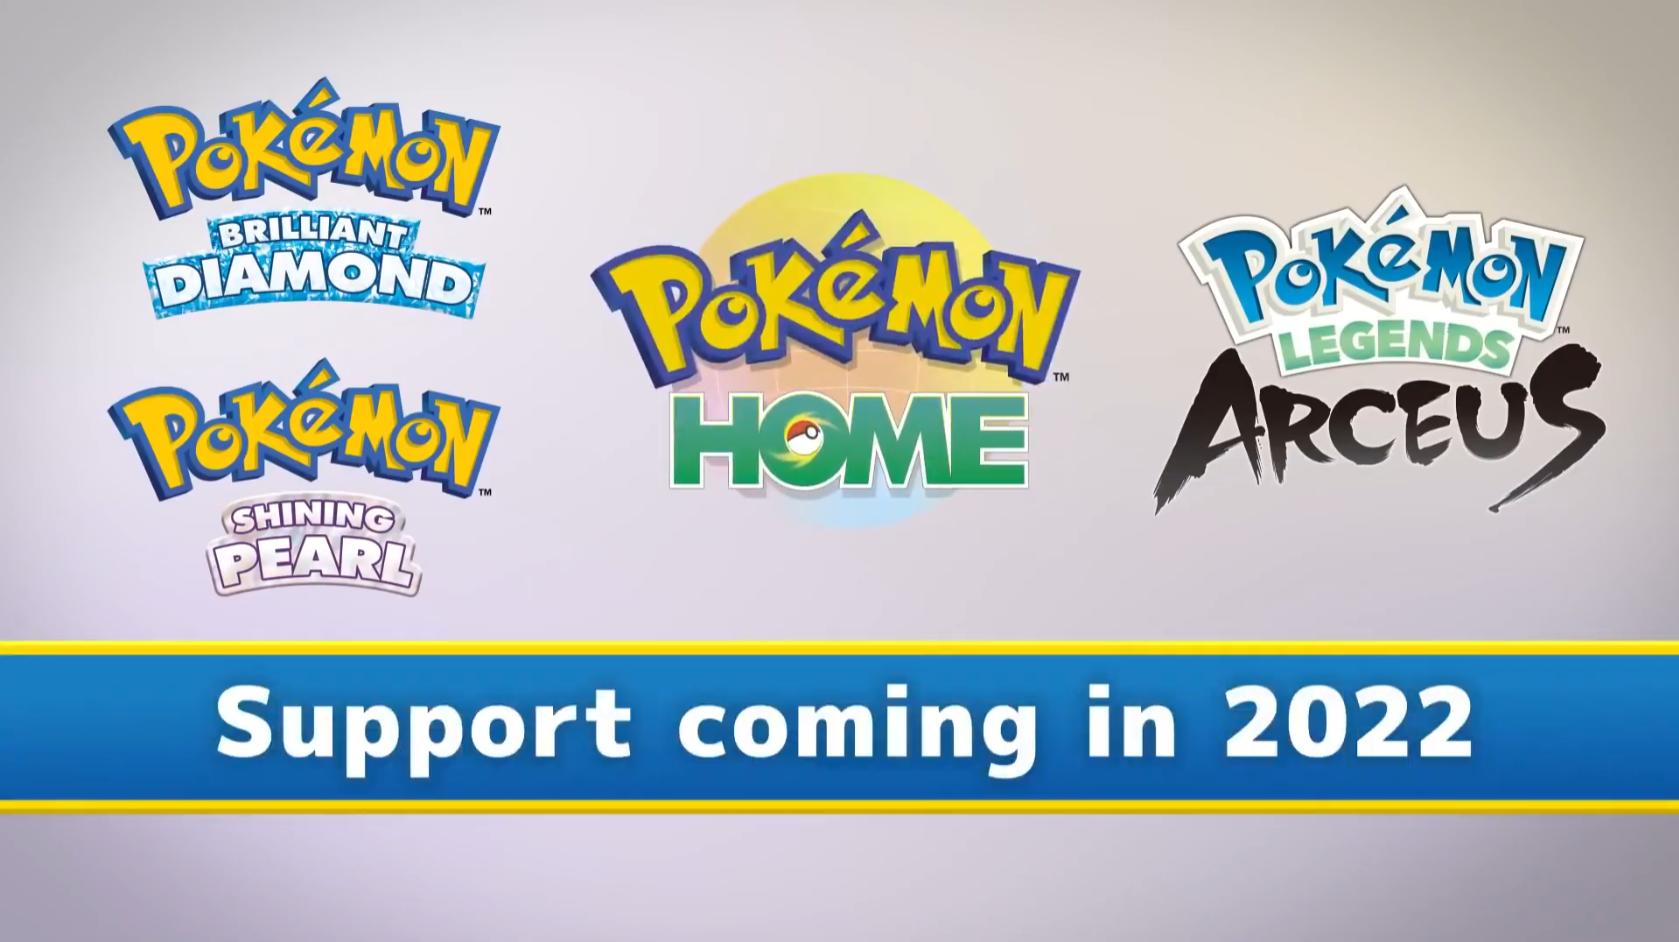 Pokémon Home supports launches in 2022 for Brilliant Diamond, Shining